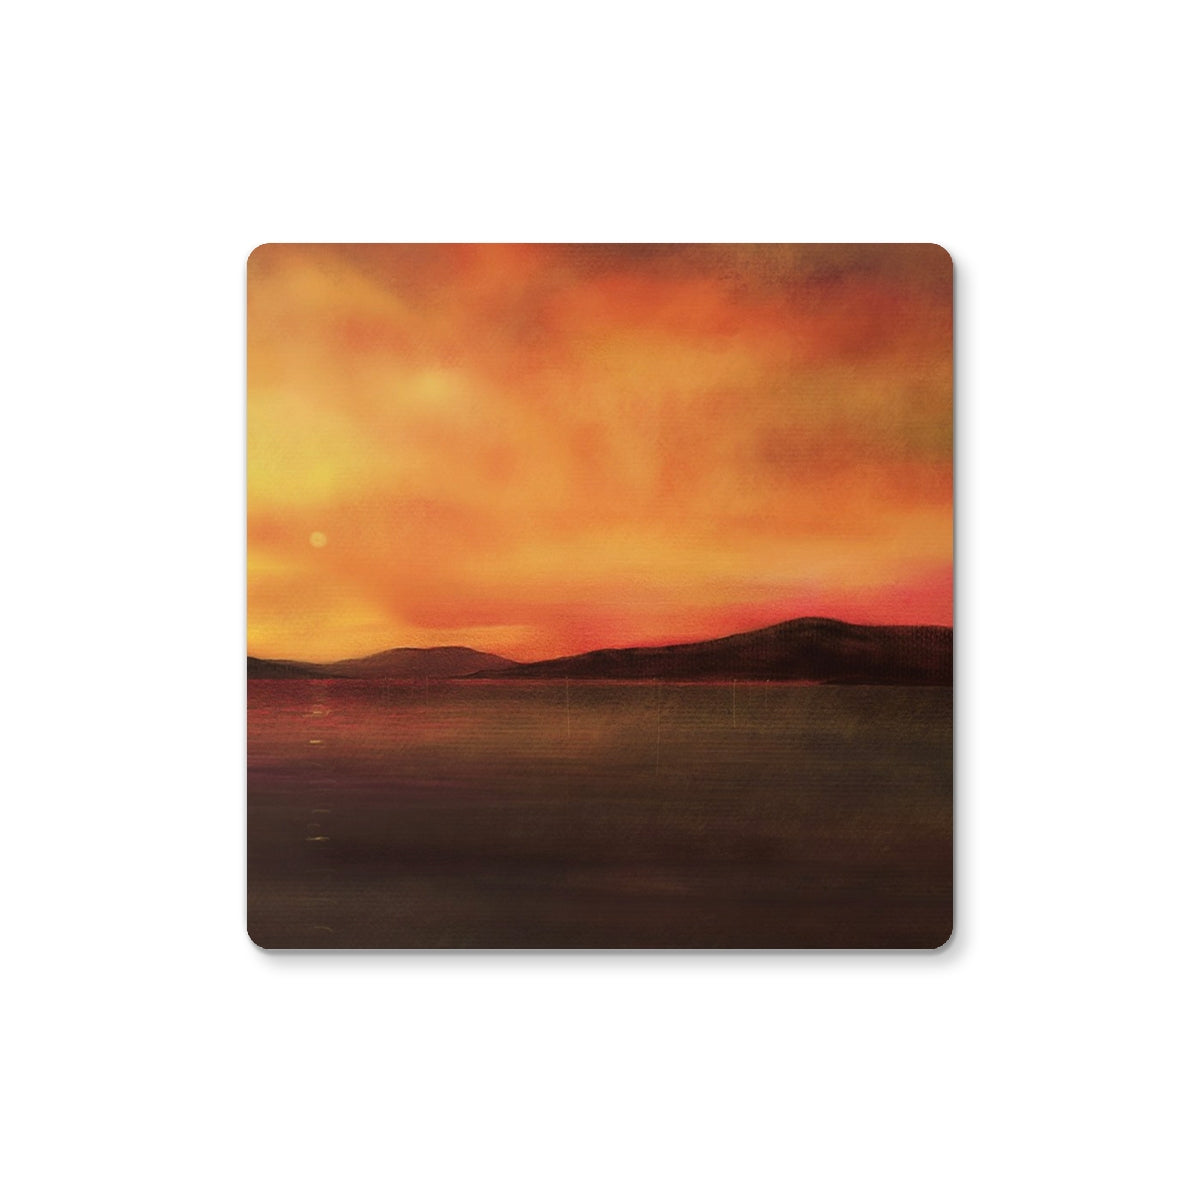 Harris Sunset Art Gifts Coaster-Coasters-Hebridean Islands Art Gallery-4 Coasters-Paintings, Prints, Homeware, Art Gifts From Scotland By Scottish Artist Kevin Hunter